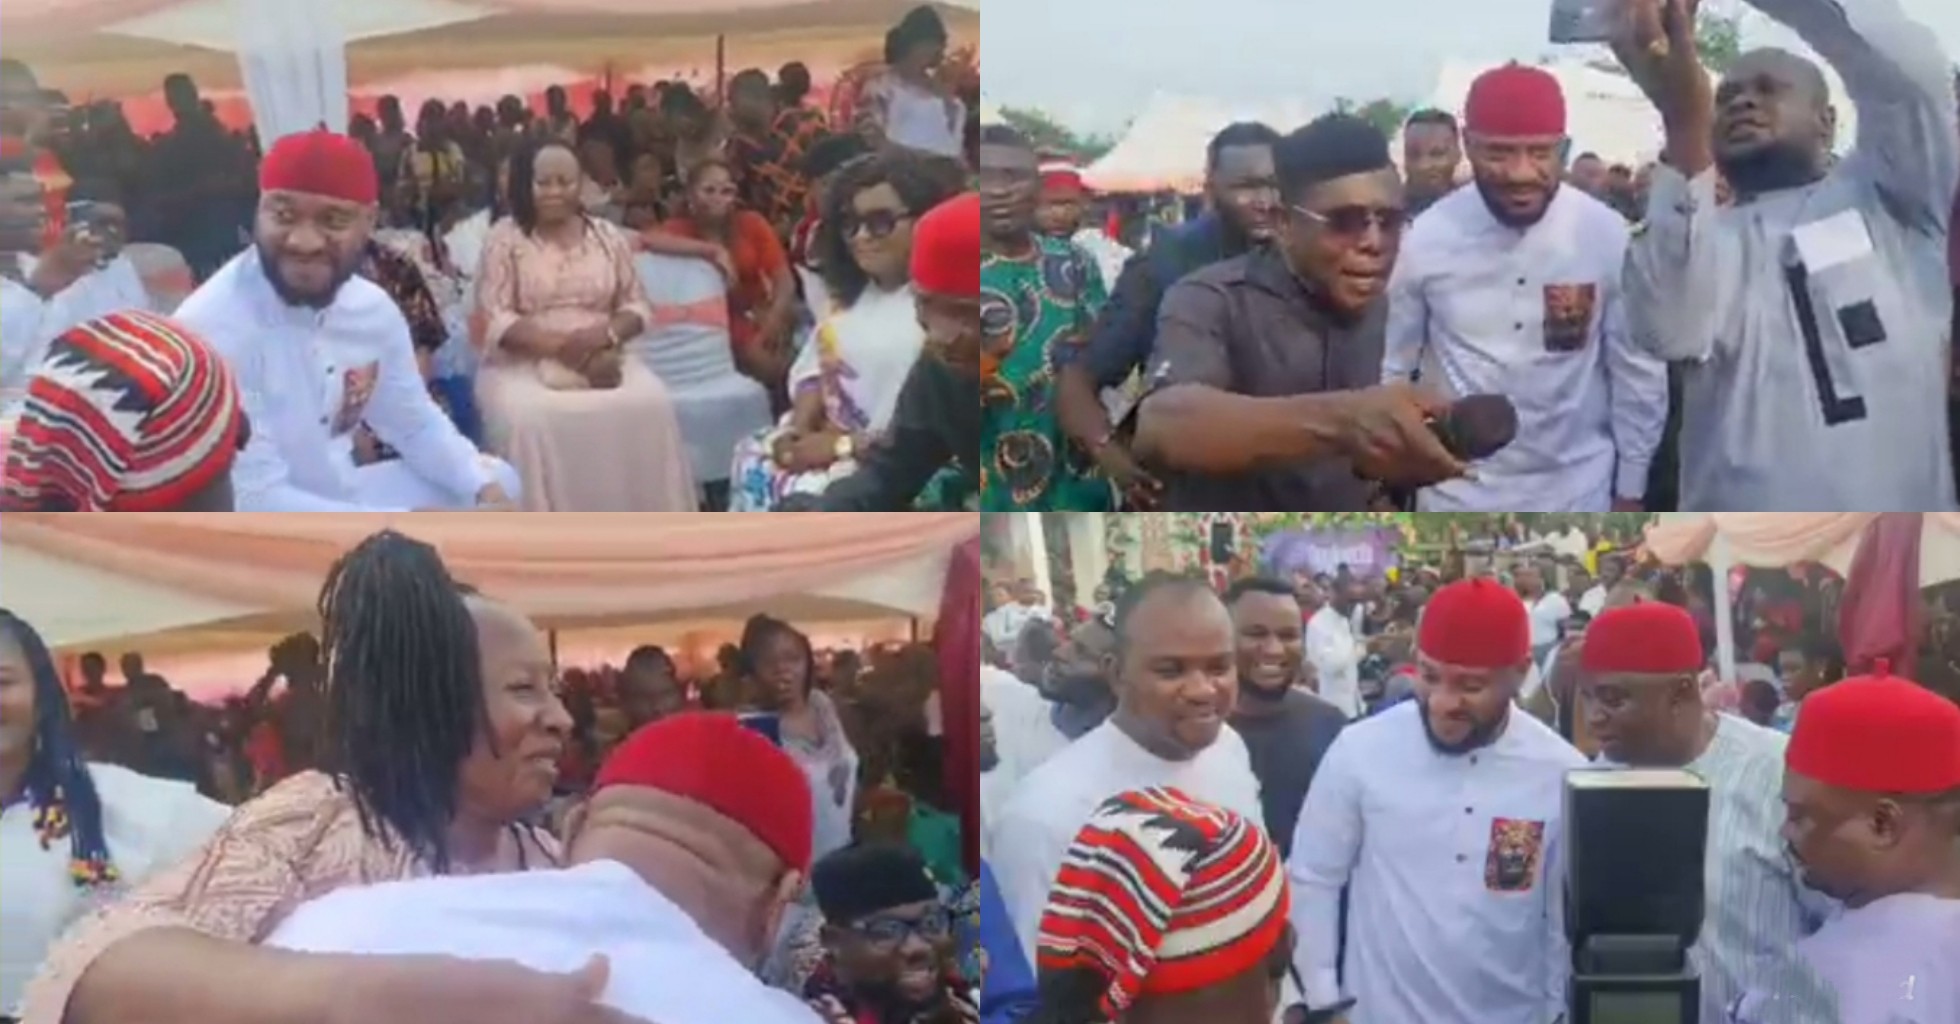 VIDEO: Yul Edochie thanks Nkem Owoh, Patience Ozokwo, Ebele Okaro, fans for massive reception at an event